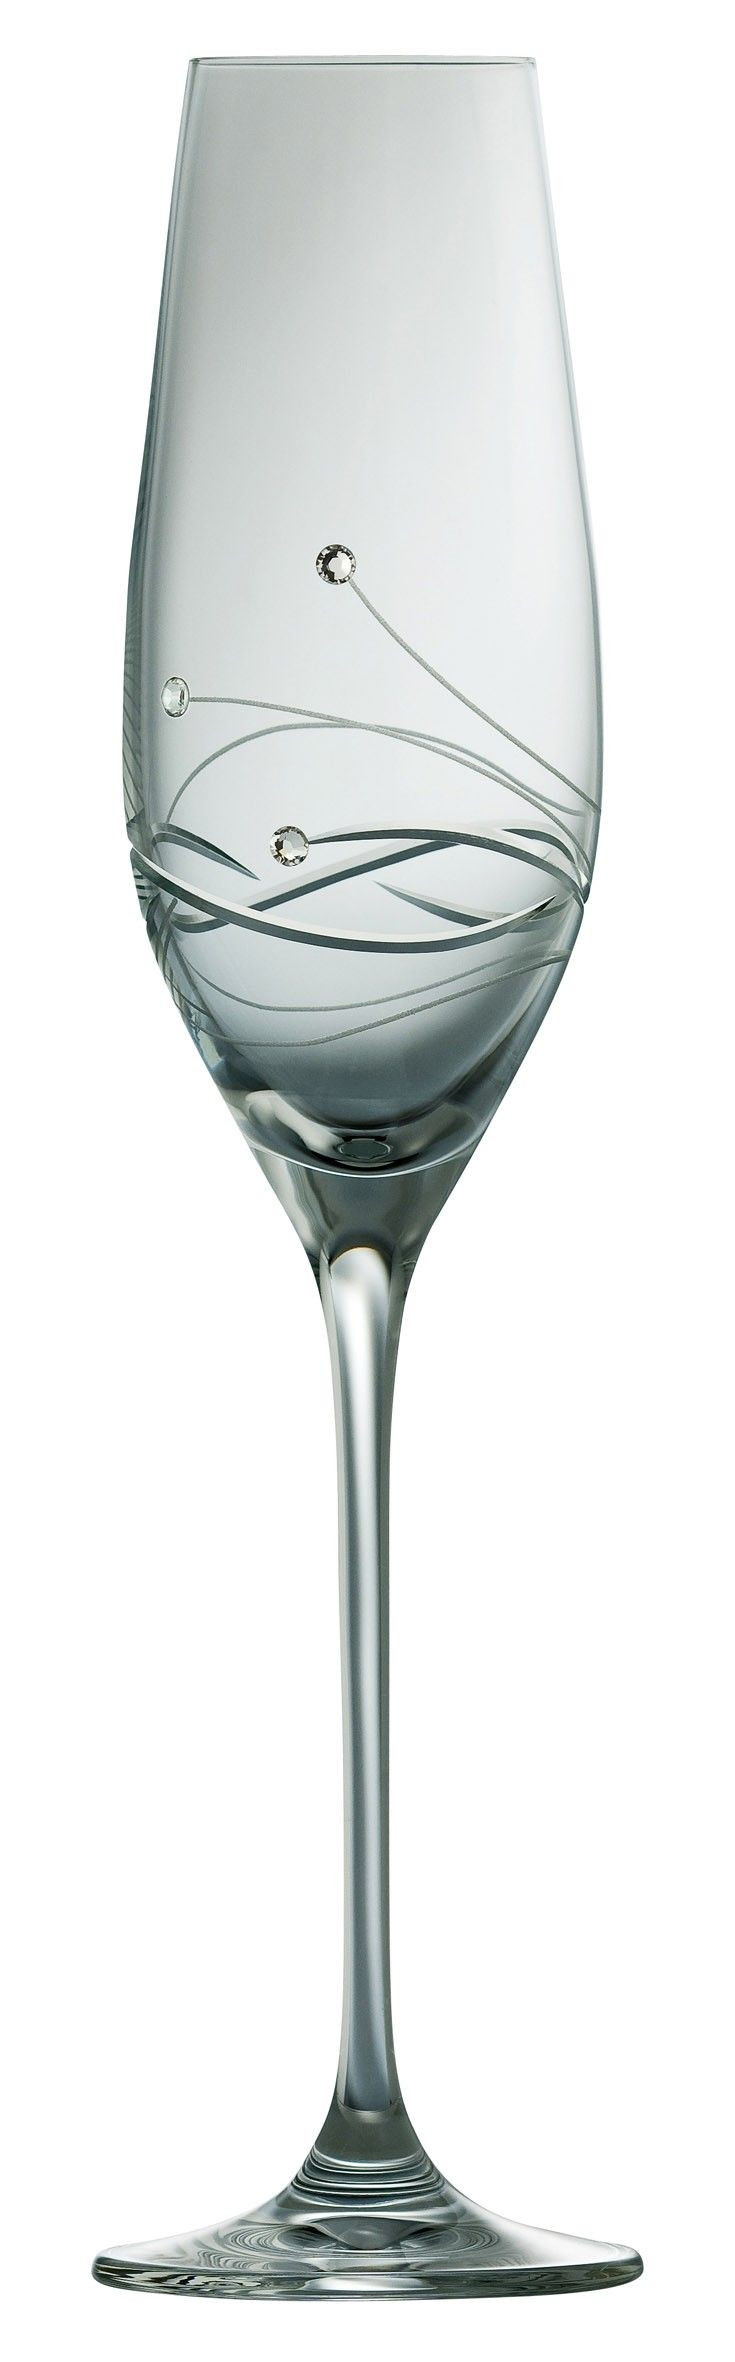 15 Ideal Marquis by Waterford Sparkle 9 Vase 2024 free download marquis by waterford sparkle 9 vase of 8 best fathers day images on pinterest ireland irish and irish intended for galway living chic champagne flutes hand applied swarovski crystal elements